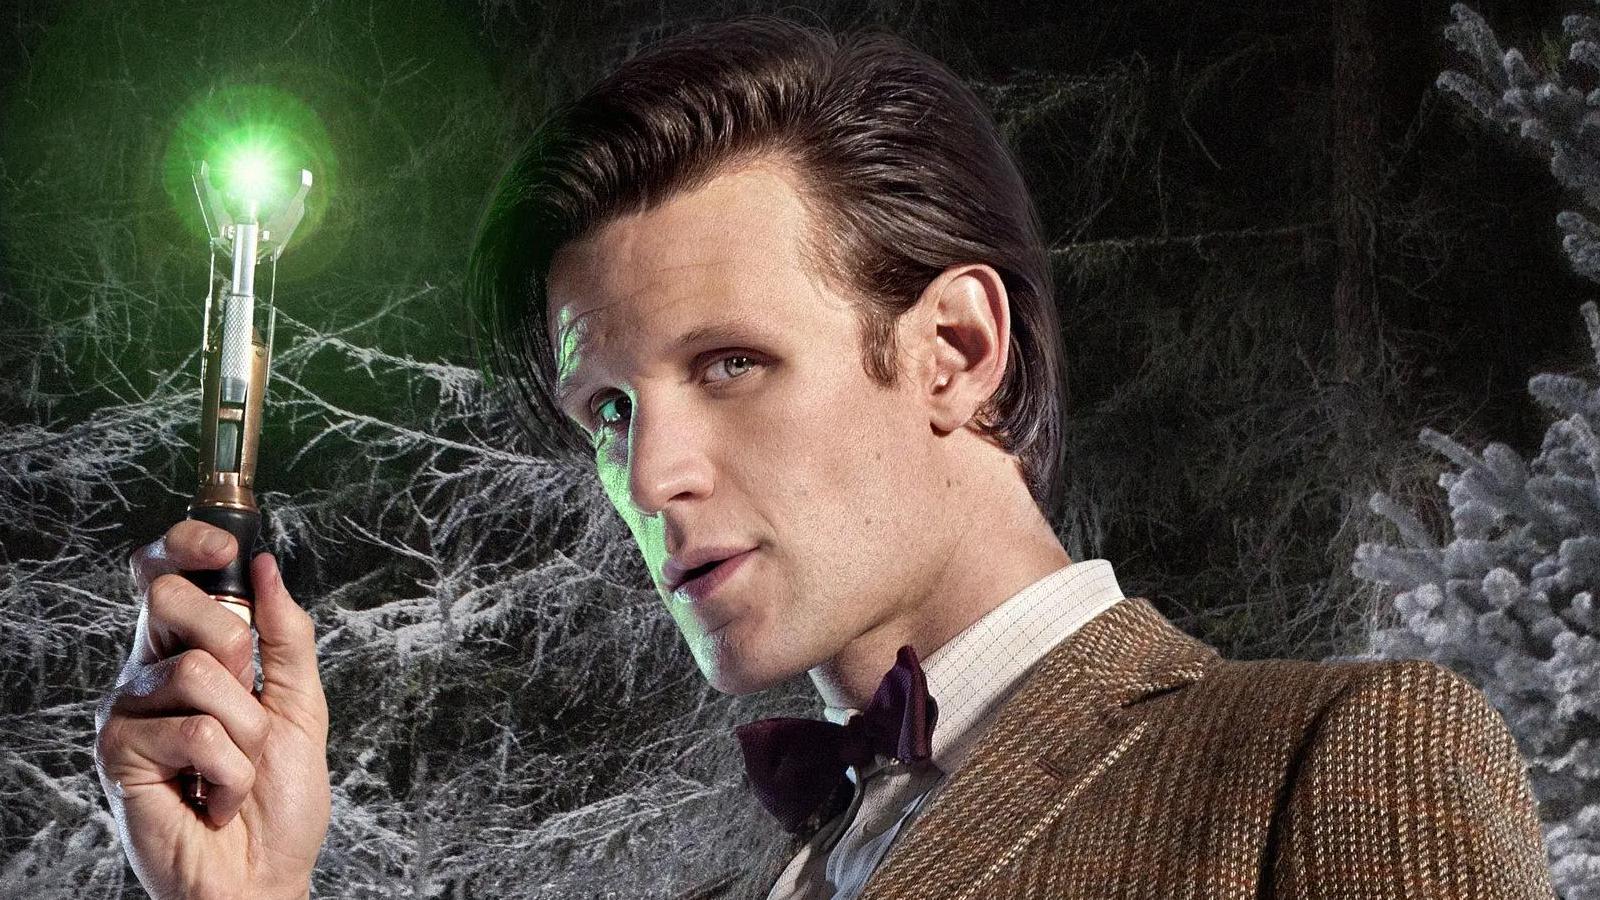 Matt Smith as the Eleventh Doctor in Doctor Who